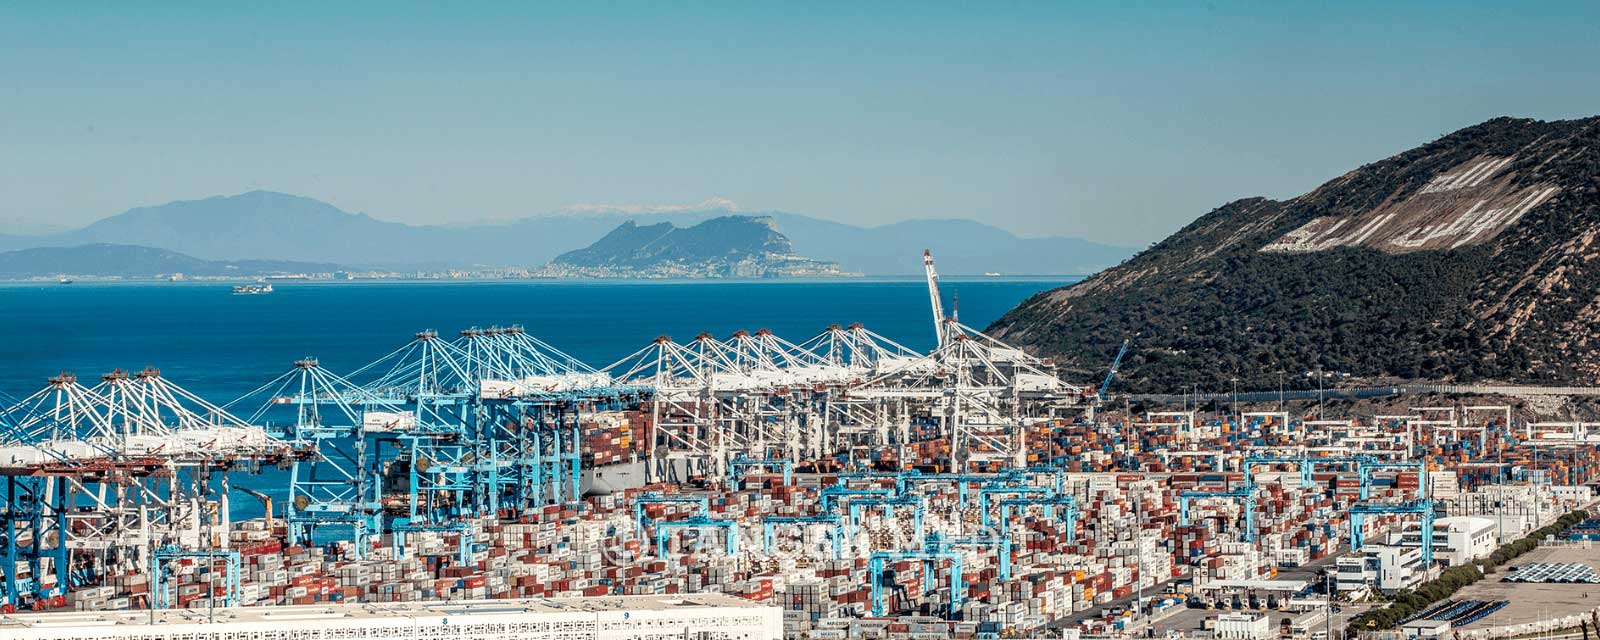 Tanger Med Port continues to be leading Mediterranean port